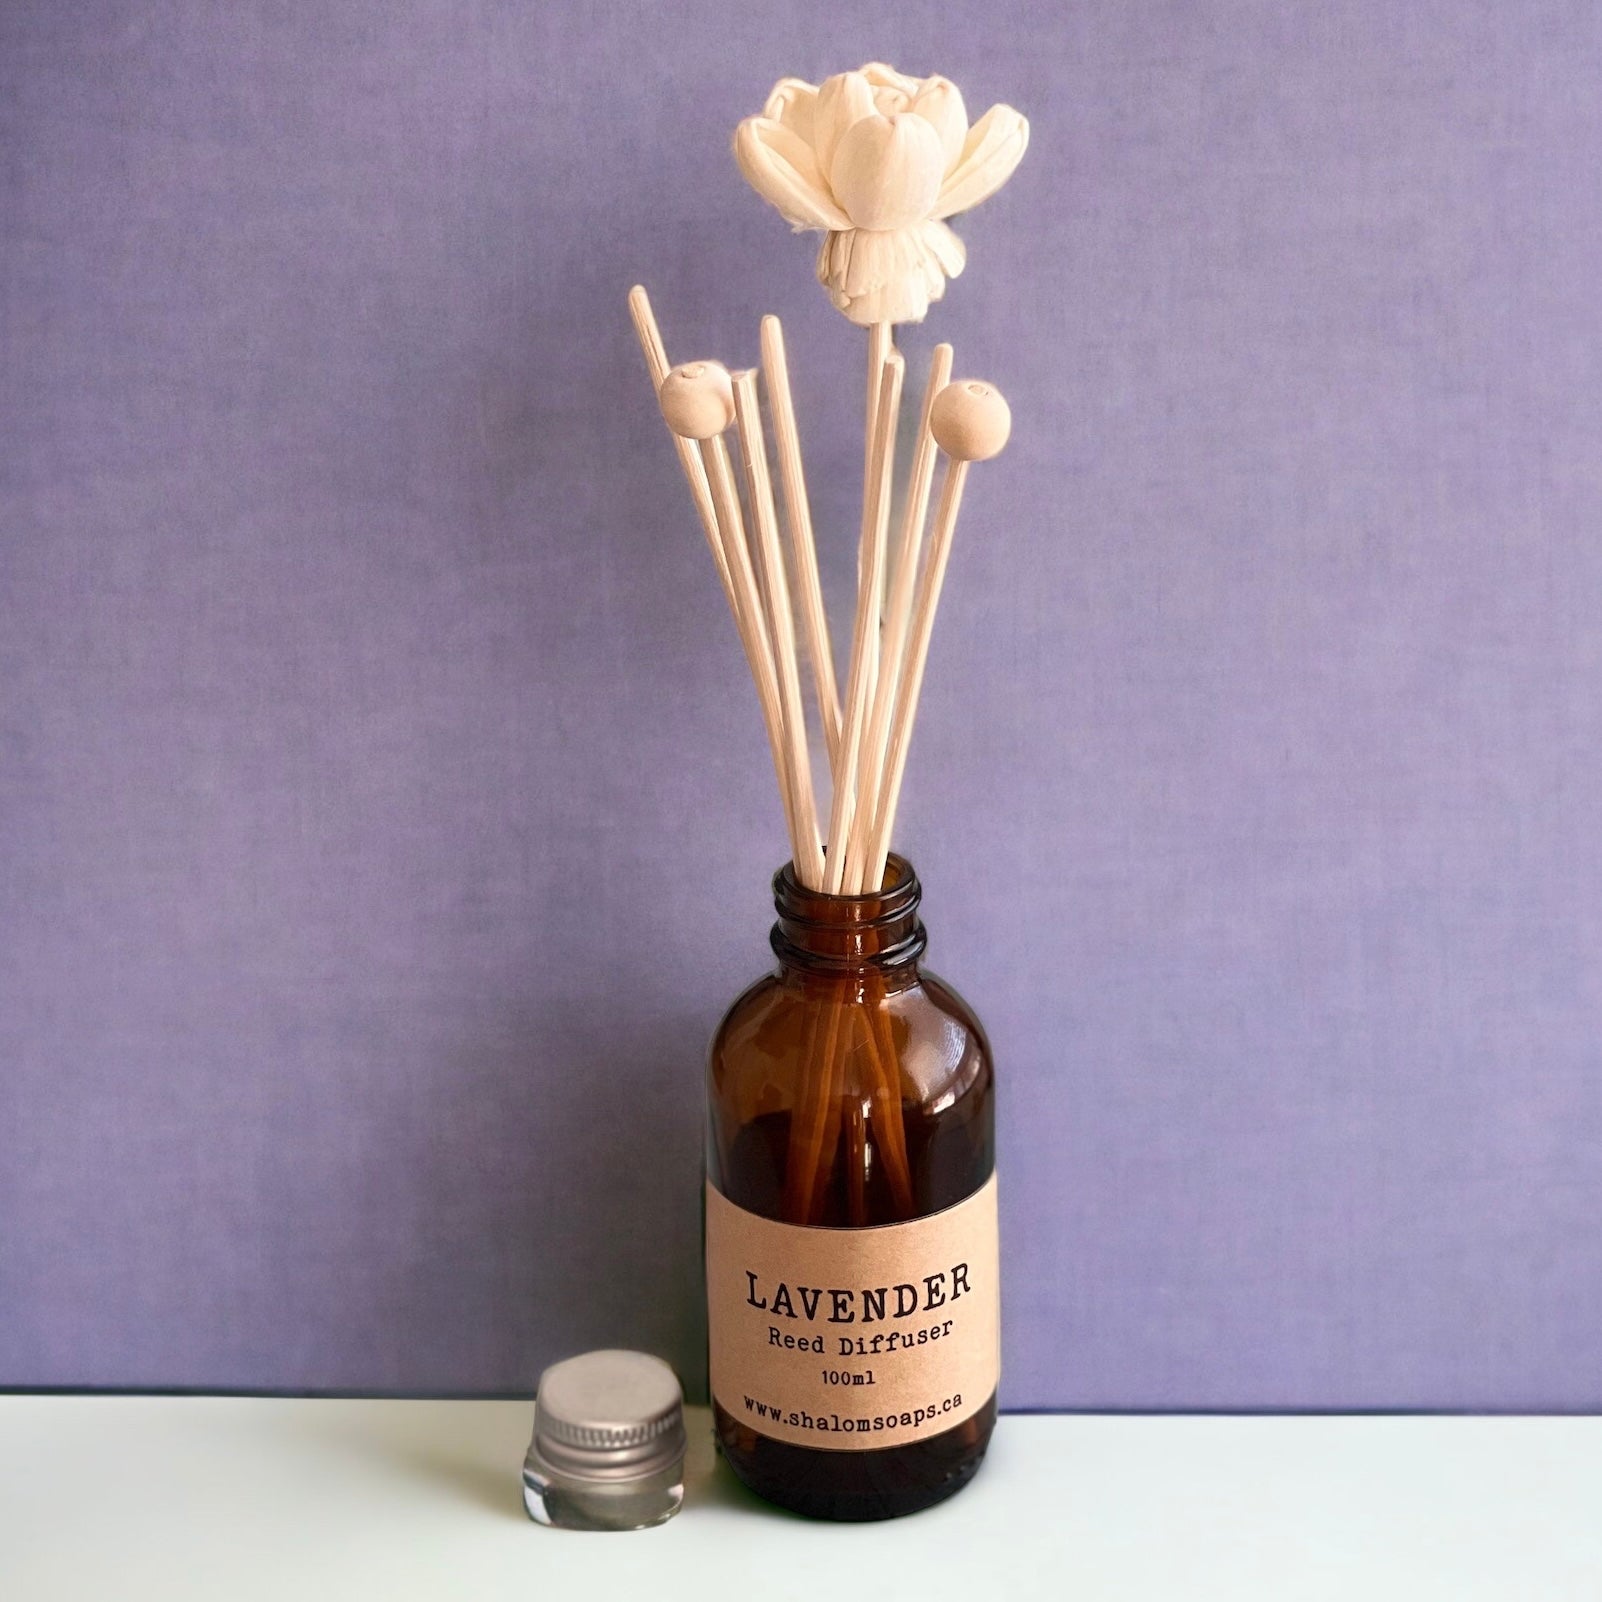 Lavender Reed Diffuser - 100ml